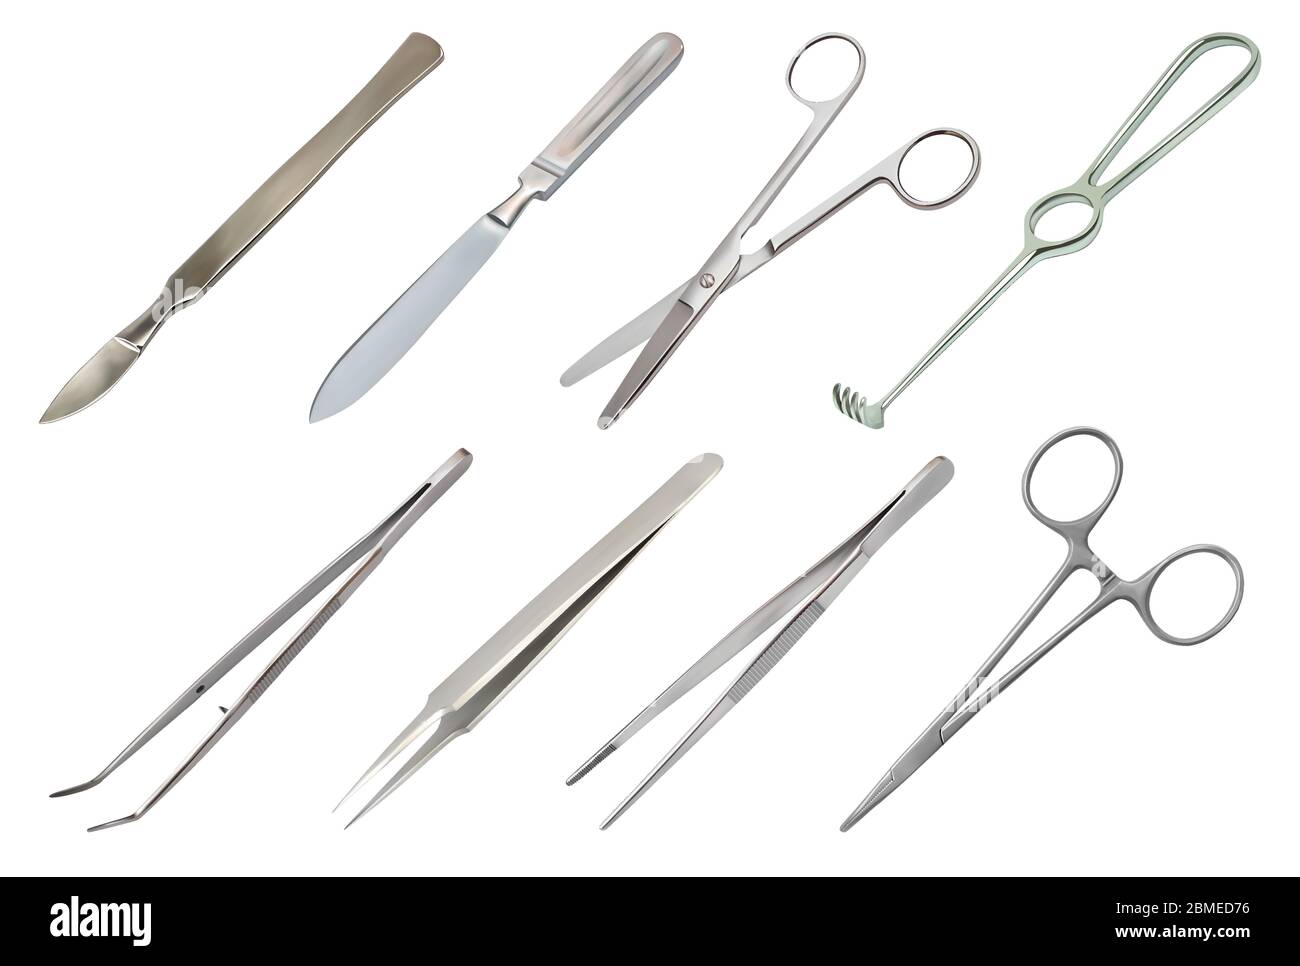 Set of surgical instruments. Different types of tweezers, all-metal ...